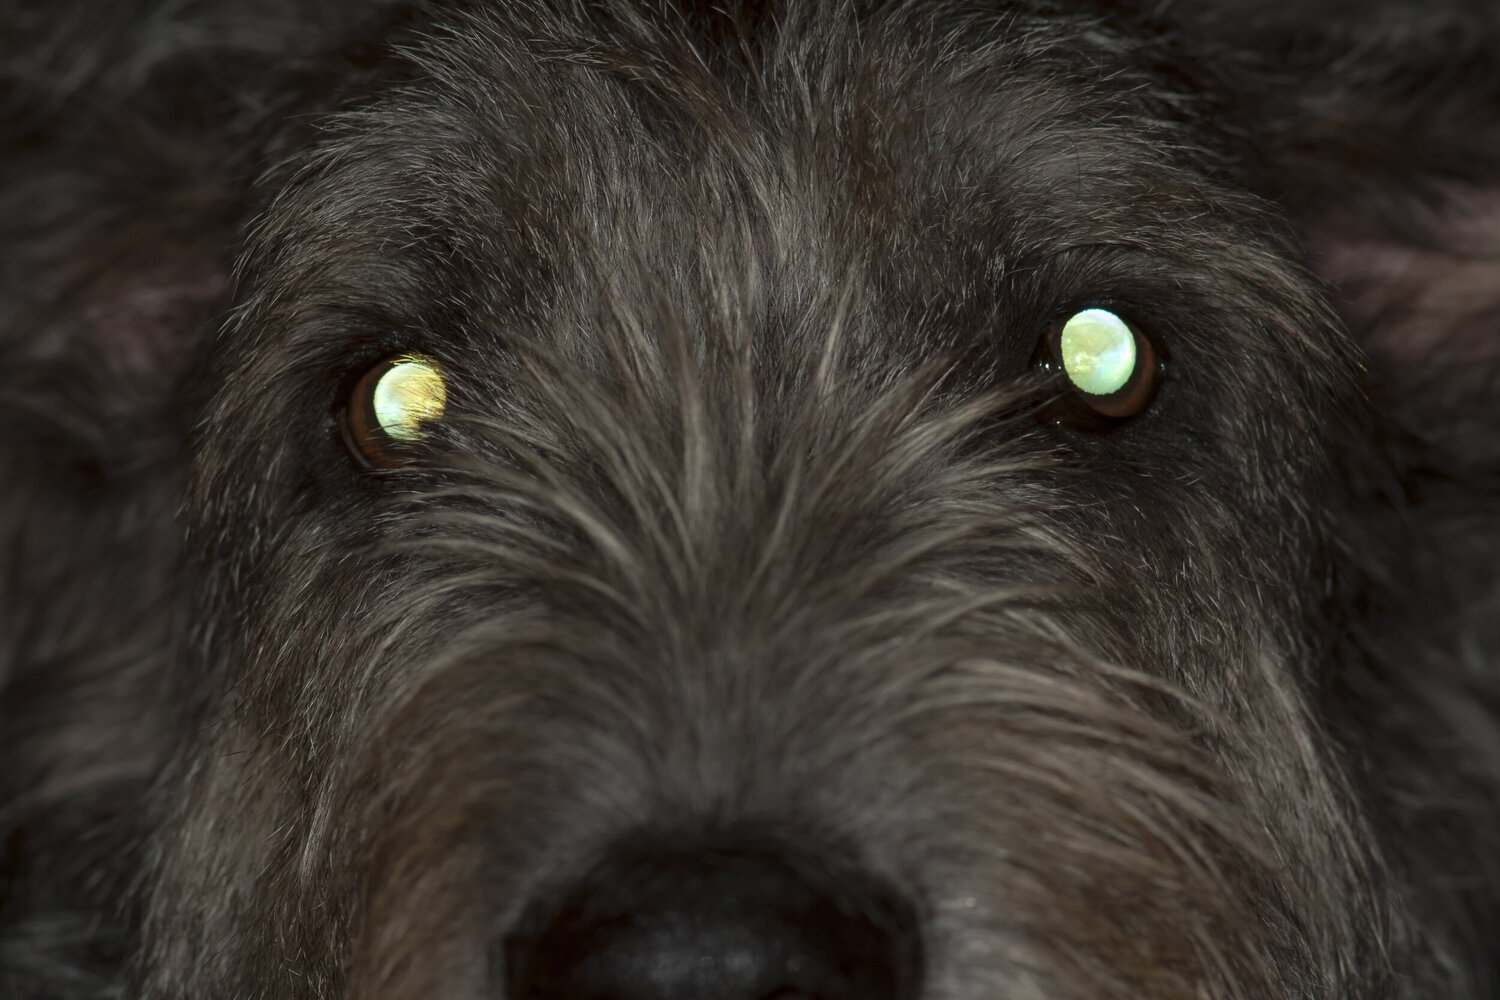 Why Does My Dog’s Eye Reflect?